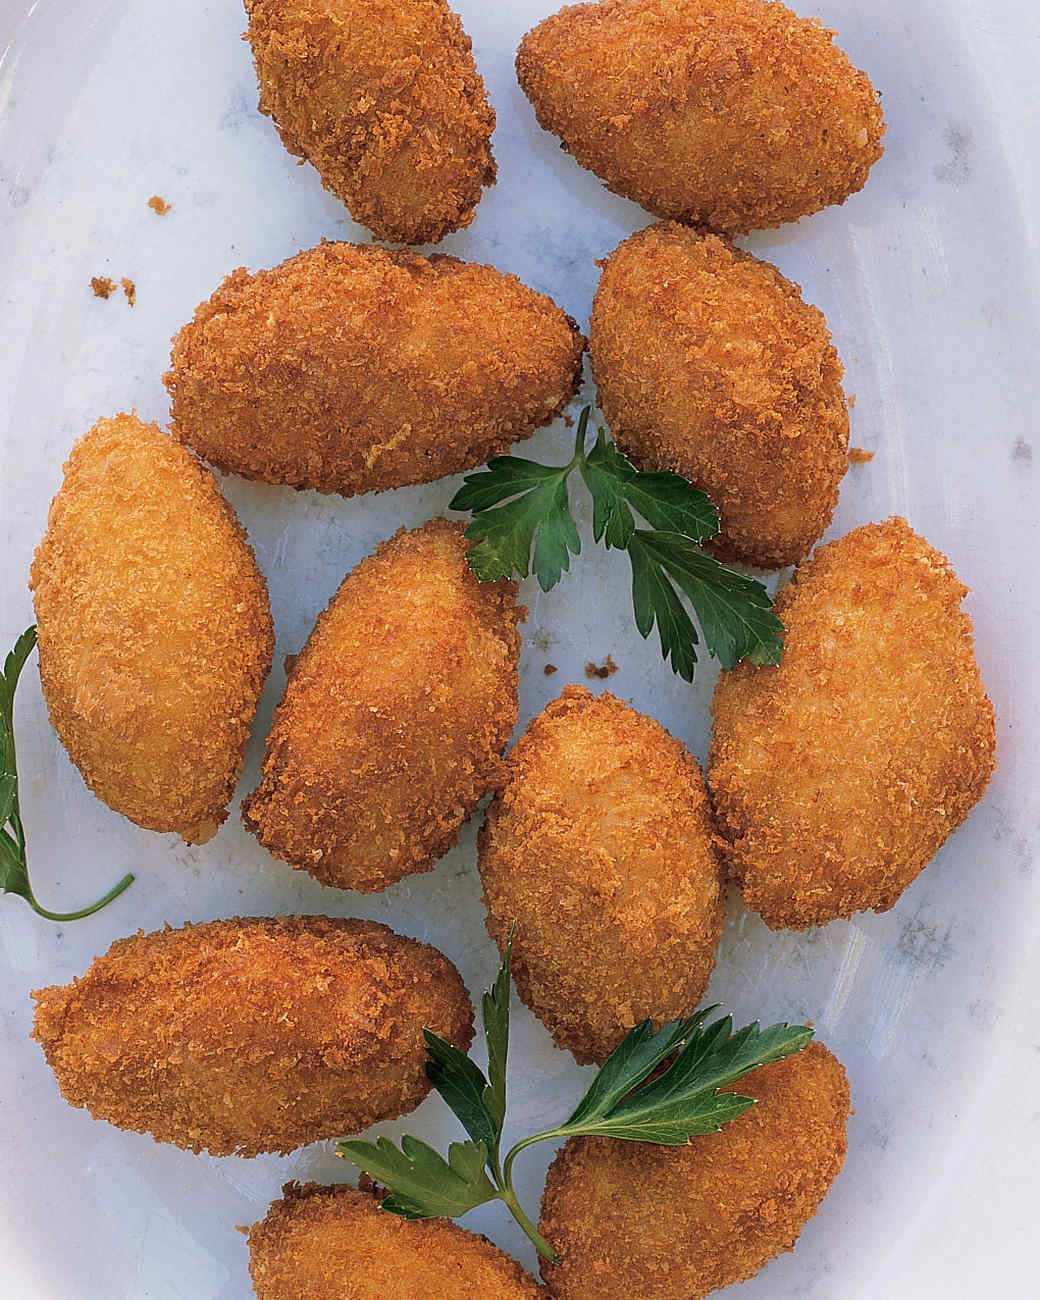 Croquettes with serrano ham and manchego cheese